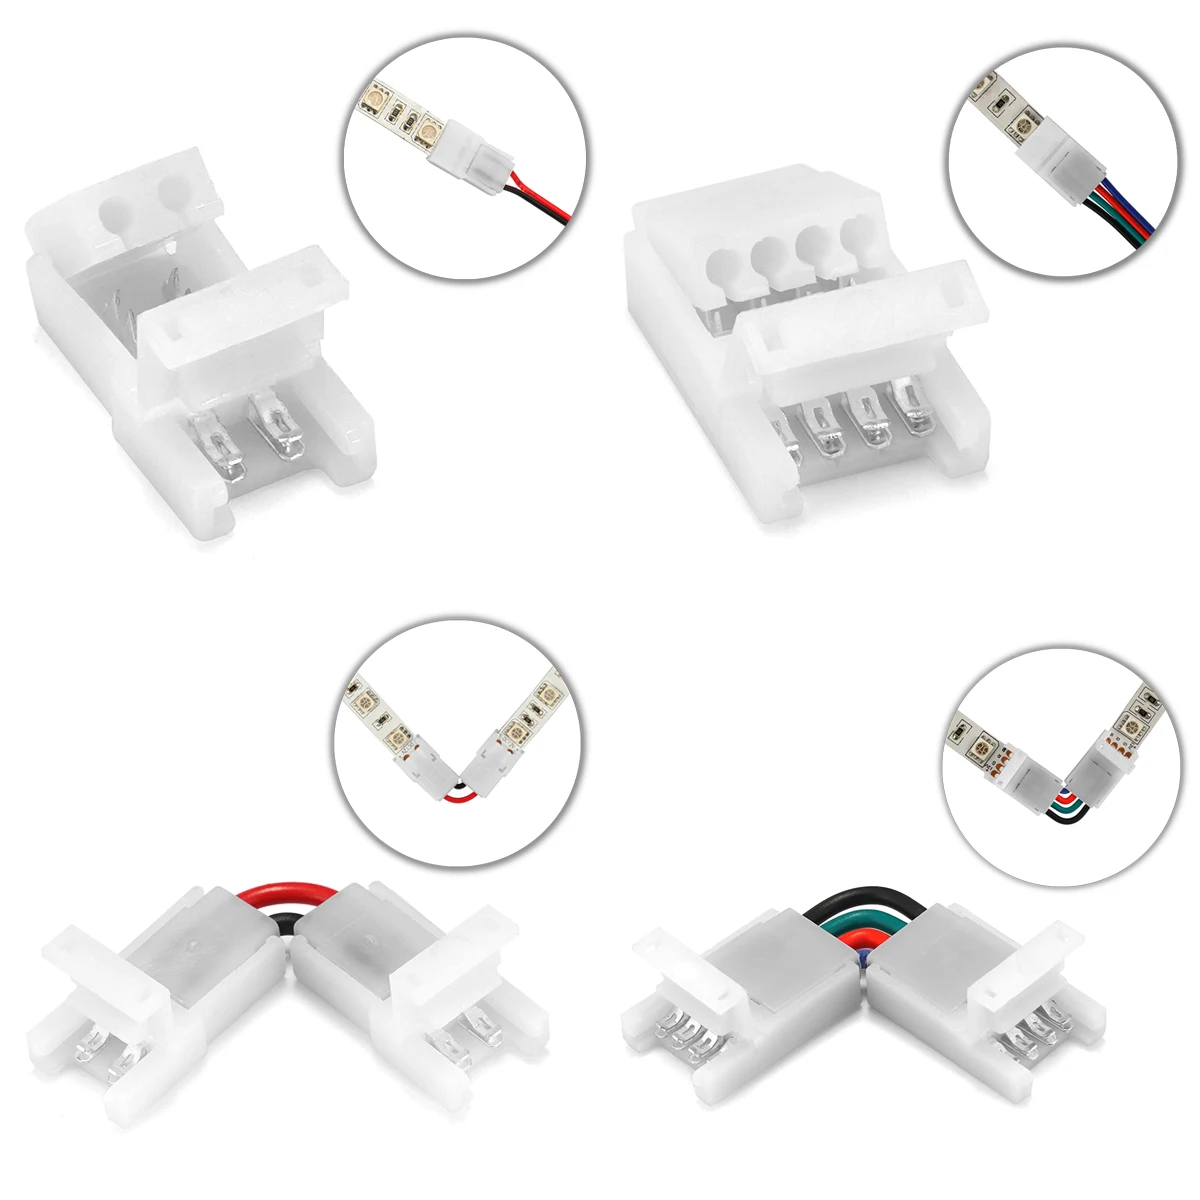 5-100pcs LED Strip Connector 2/3/4pin Strip Light to Copper Electrical Connector For 5835 RGB WS2812B Strip to Wire Terminals